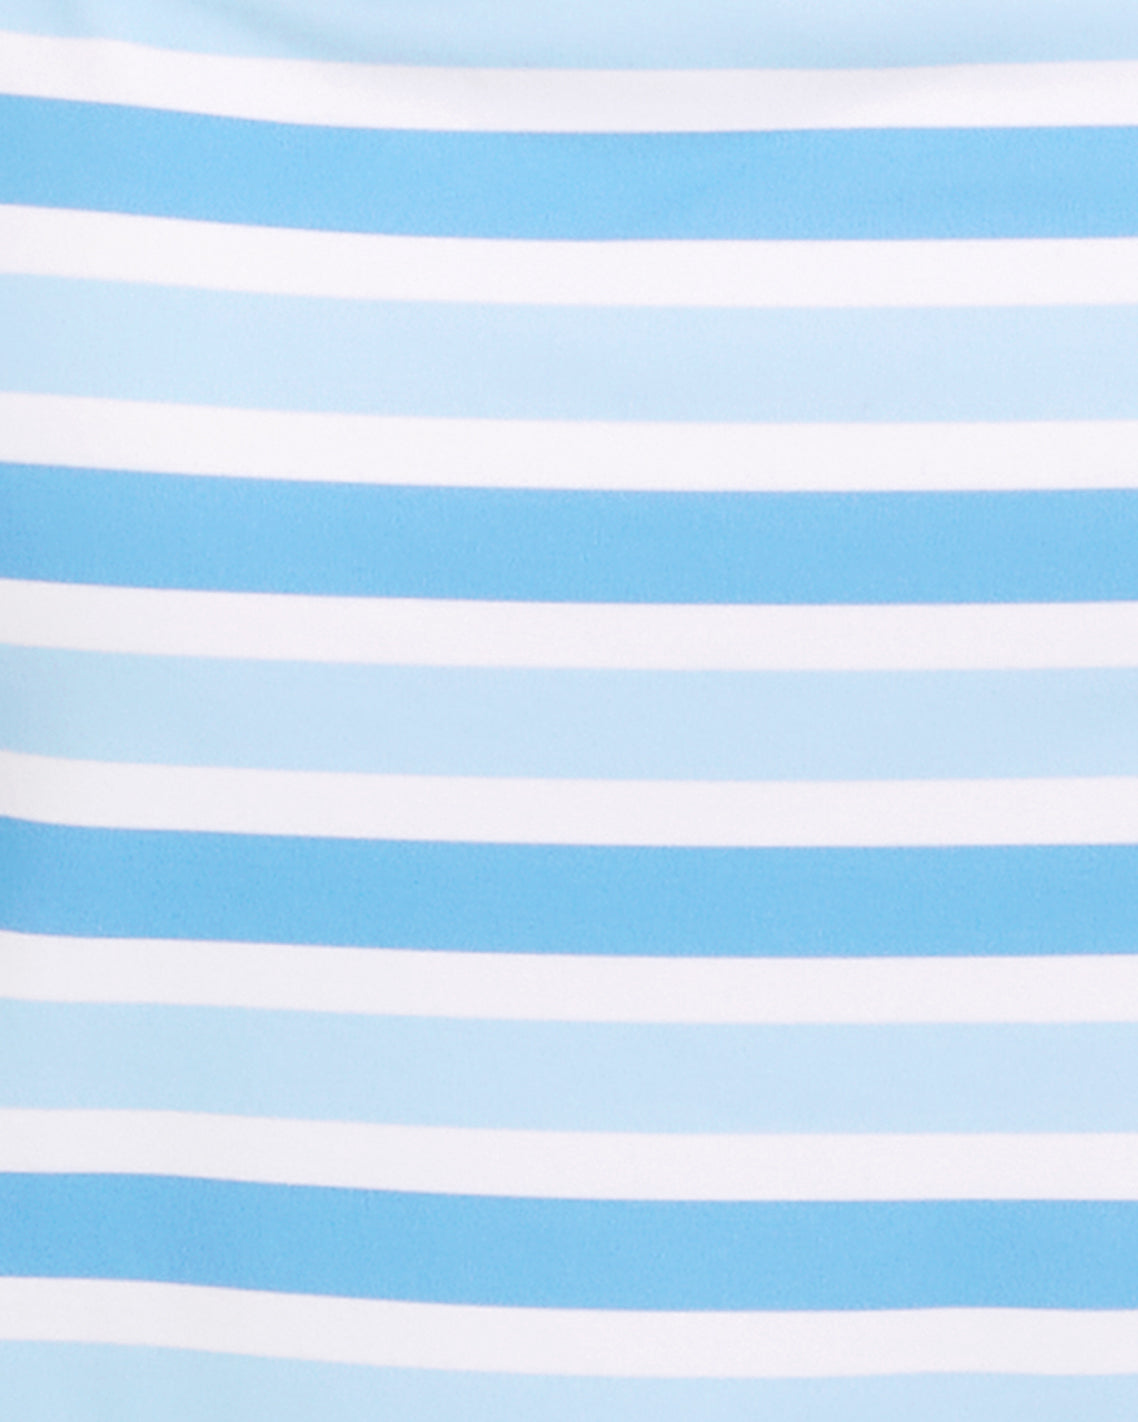 Ruffled One Piece Swimsuit in Awning Stripe